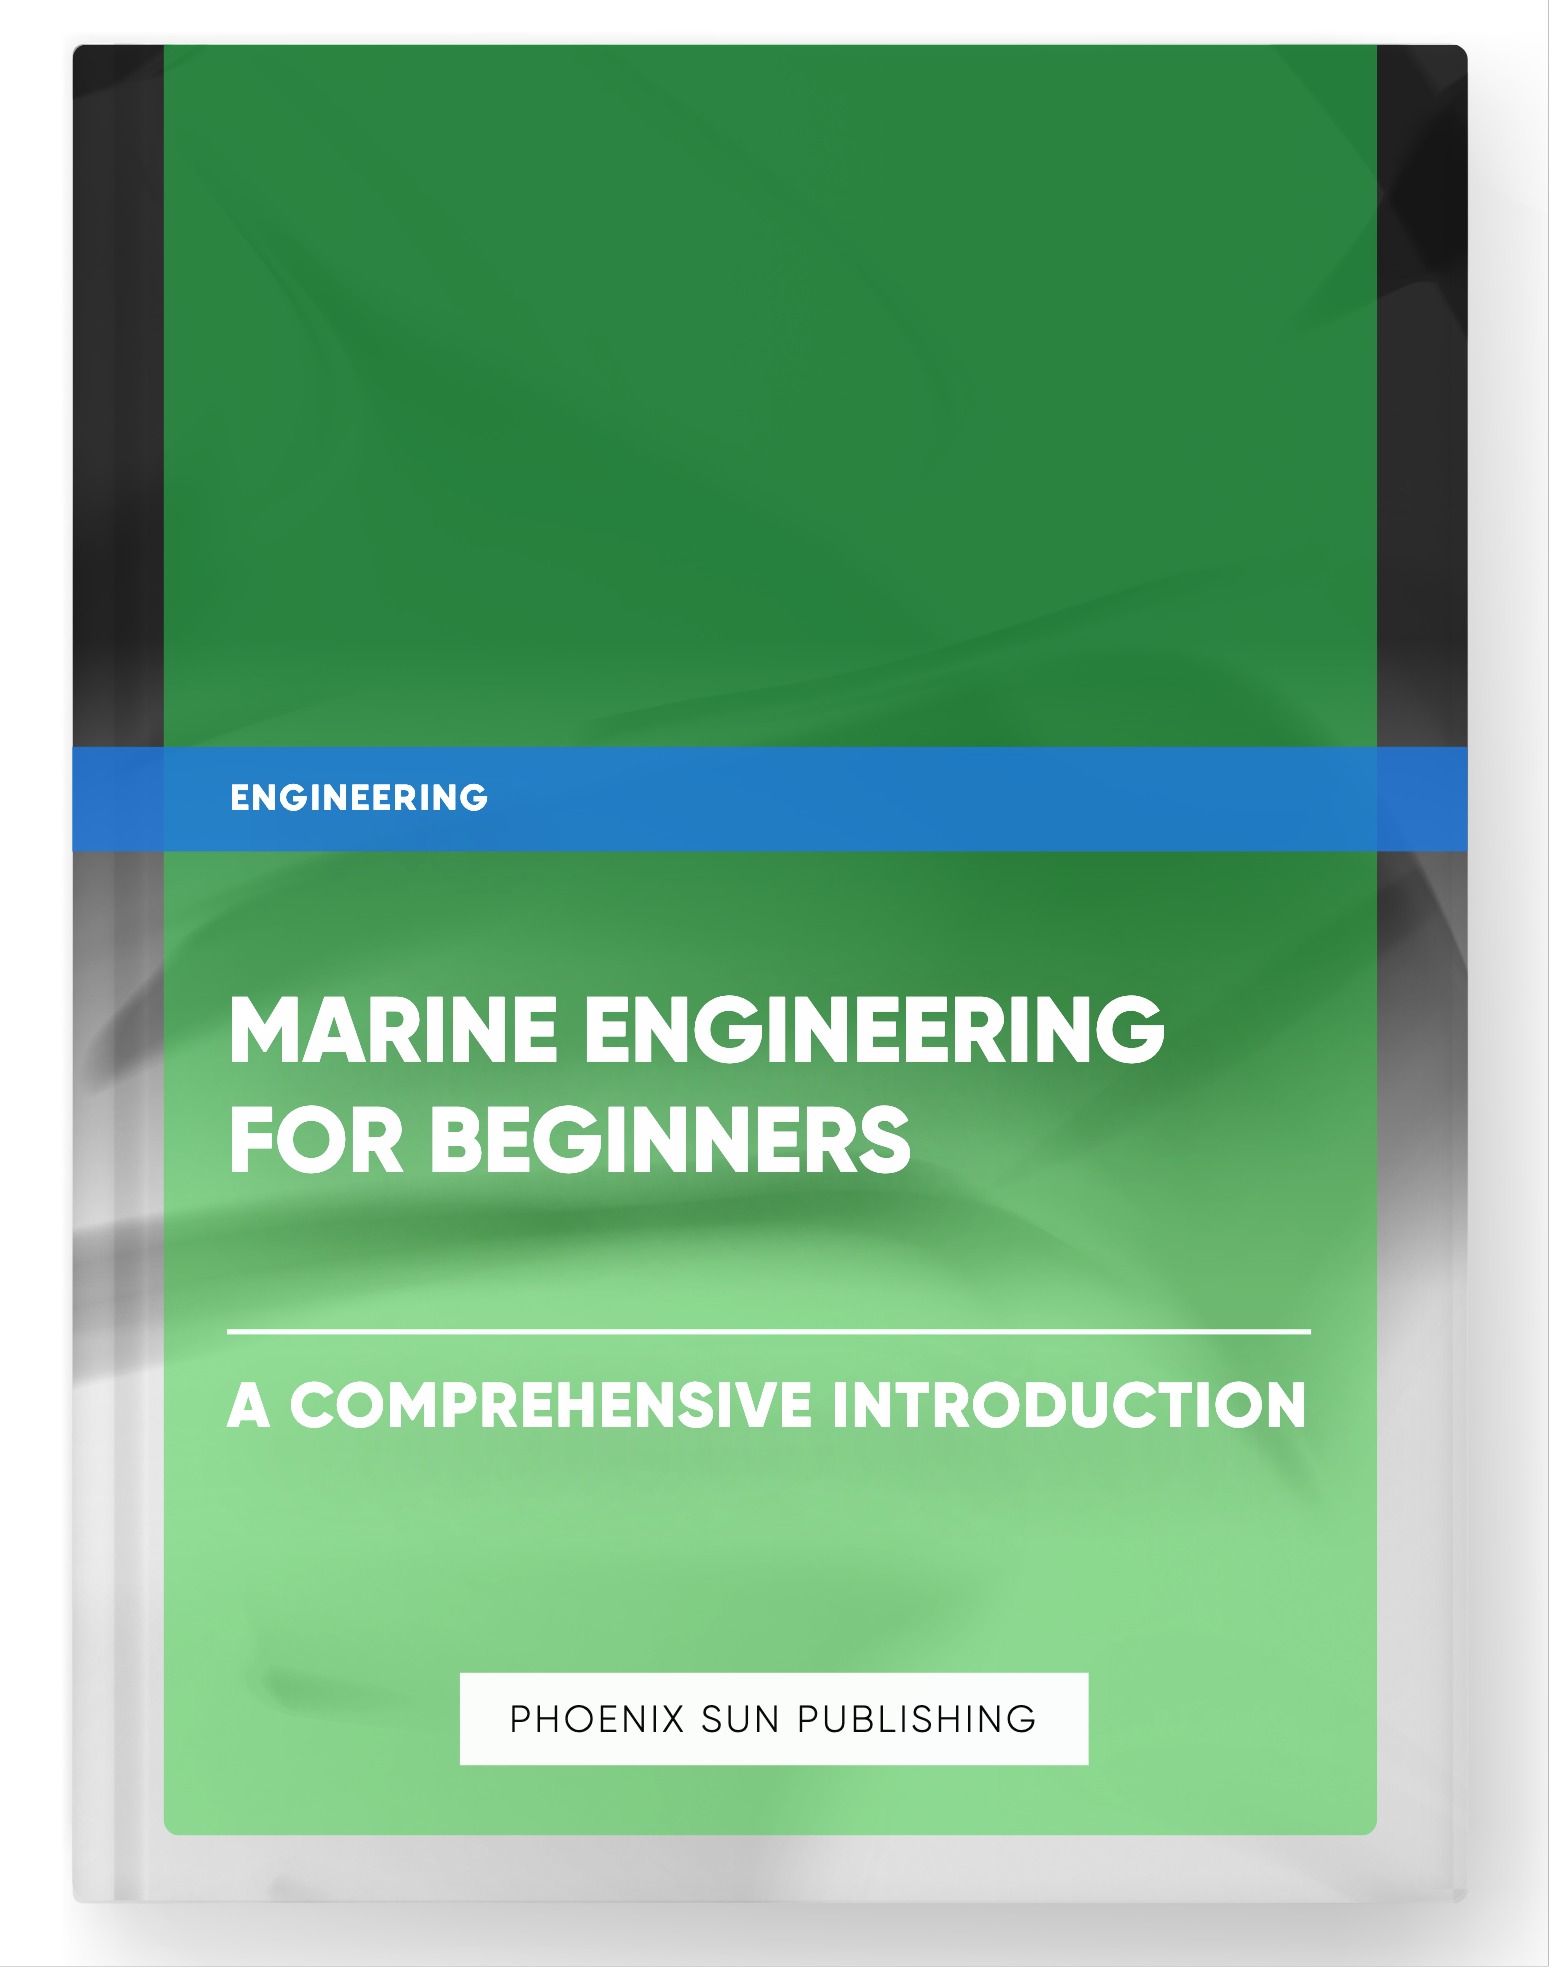 Marine Engineering for Beginners – A Comprehensive Introduction